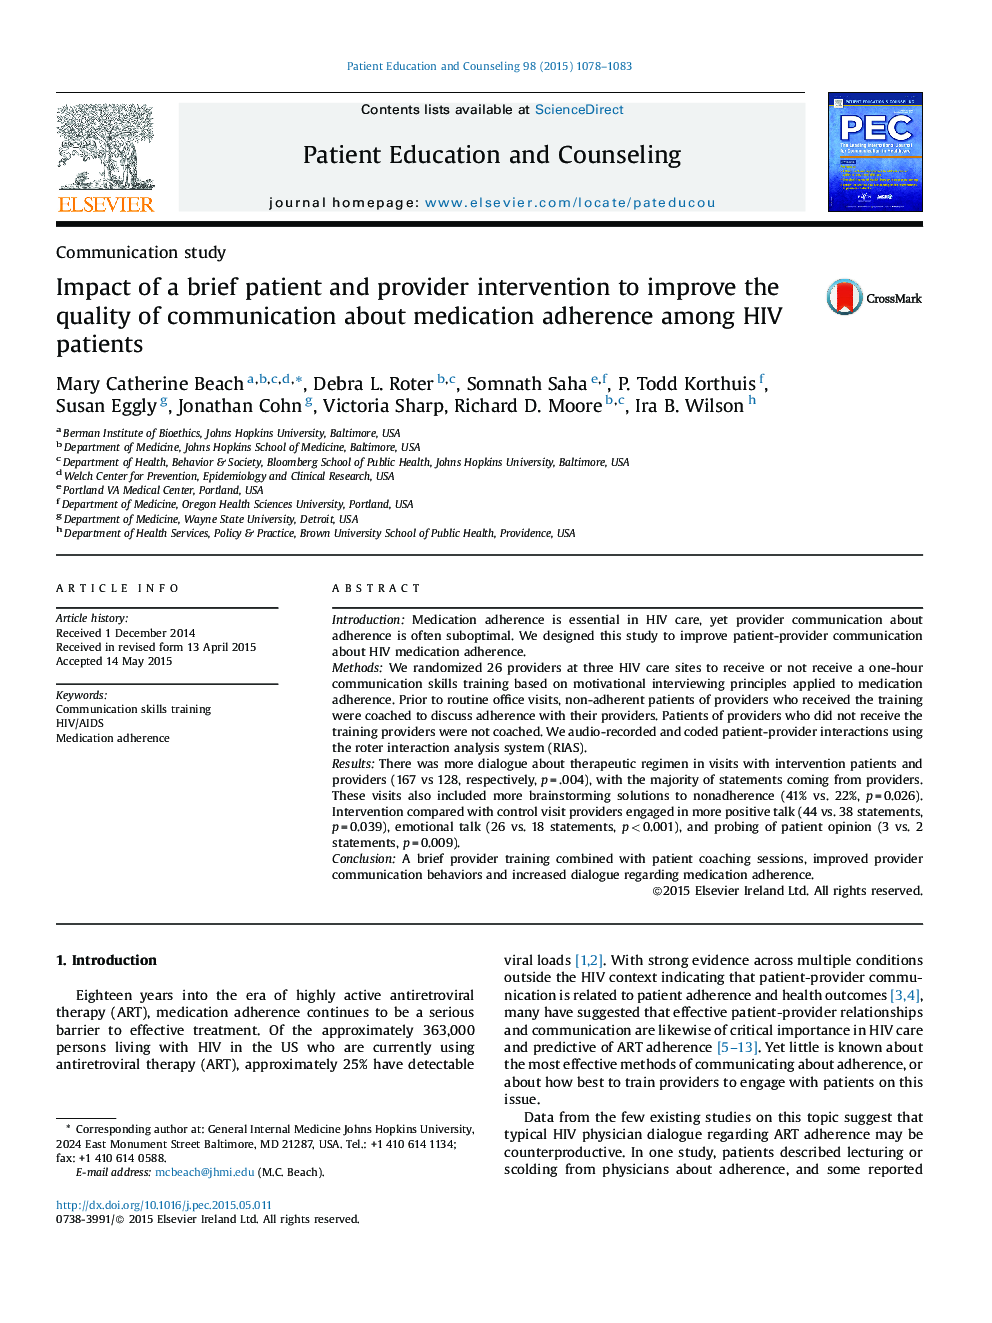 Impact of a brief patient and provider intervention to improve the quality of communication about medication adherence among HIV patients